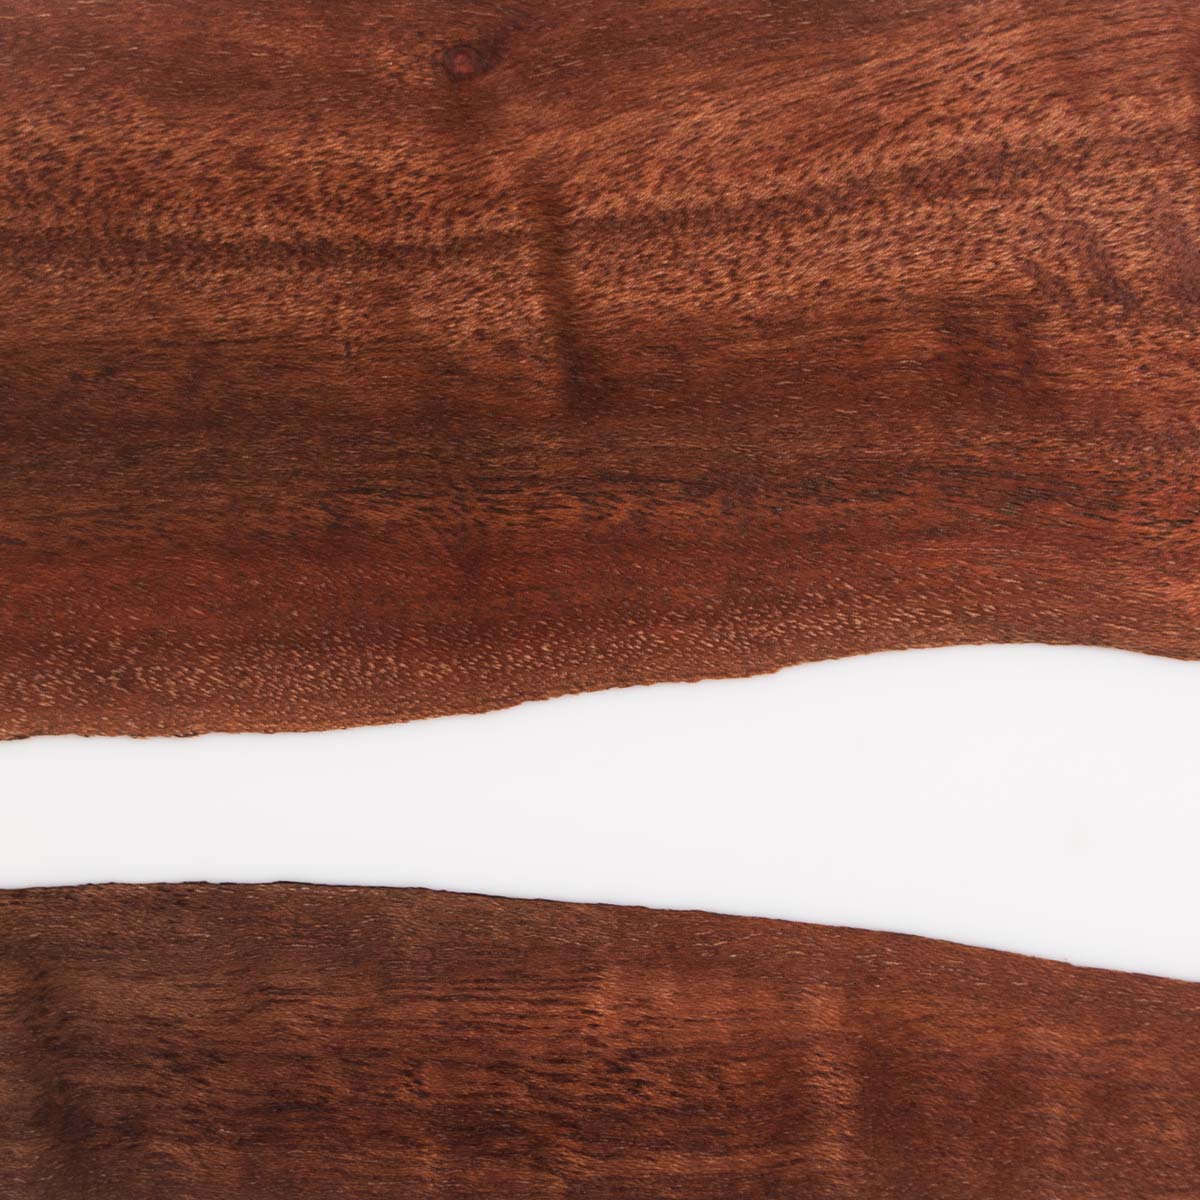 White epoxy resin river in light brown hardwood, a detailed close up of a magnetic knife holder for kitchen knives